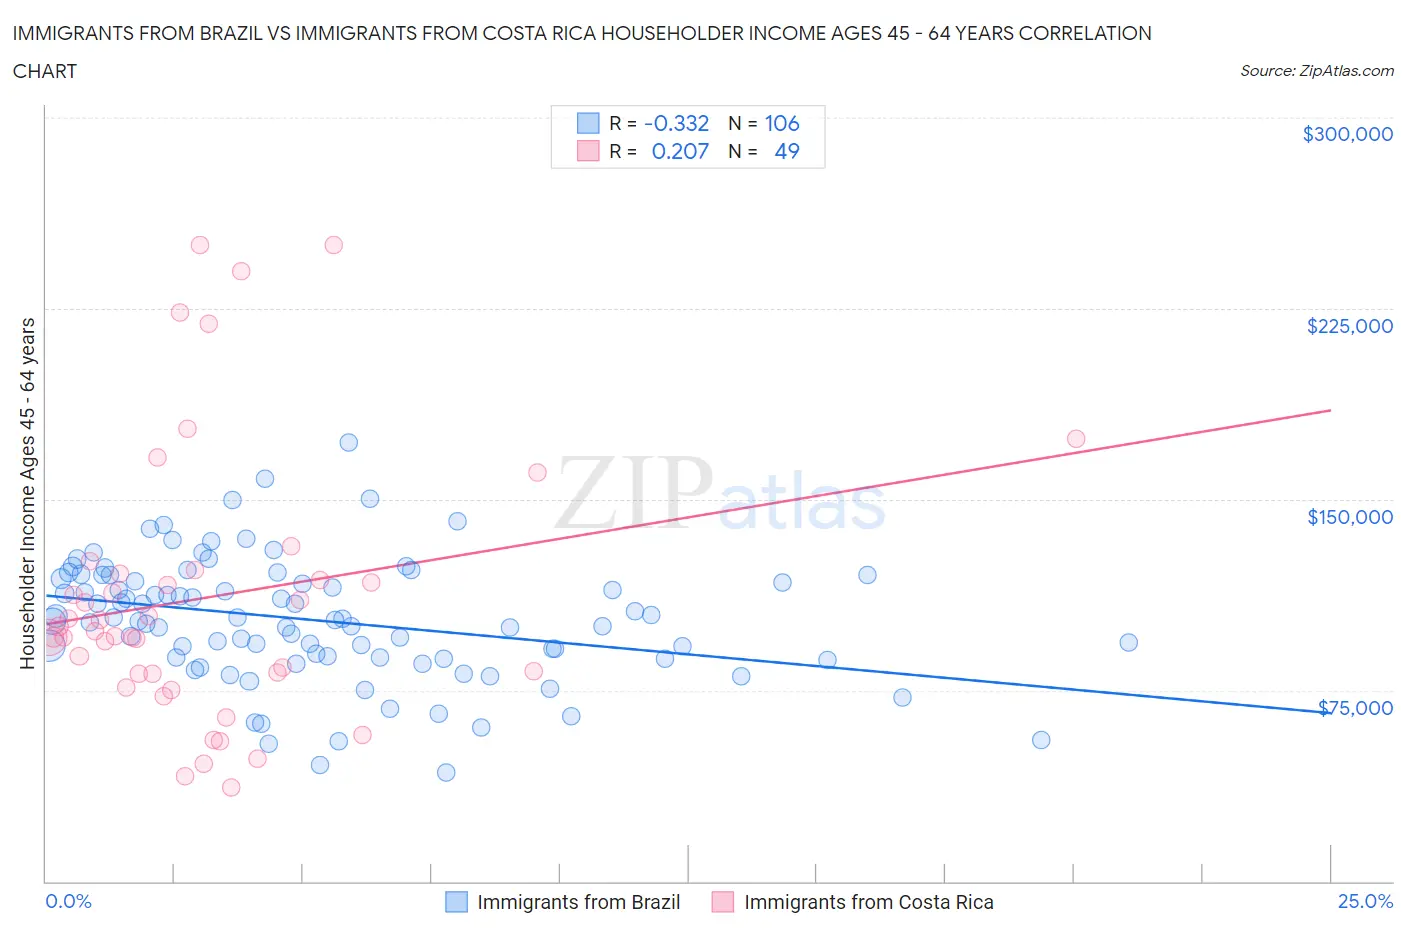 Immigrants from Brazil vs Immigrants from Costa Rica Householder Income Ages 45 - 64 years